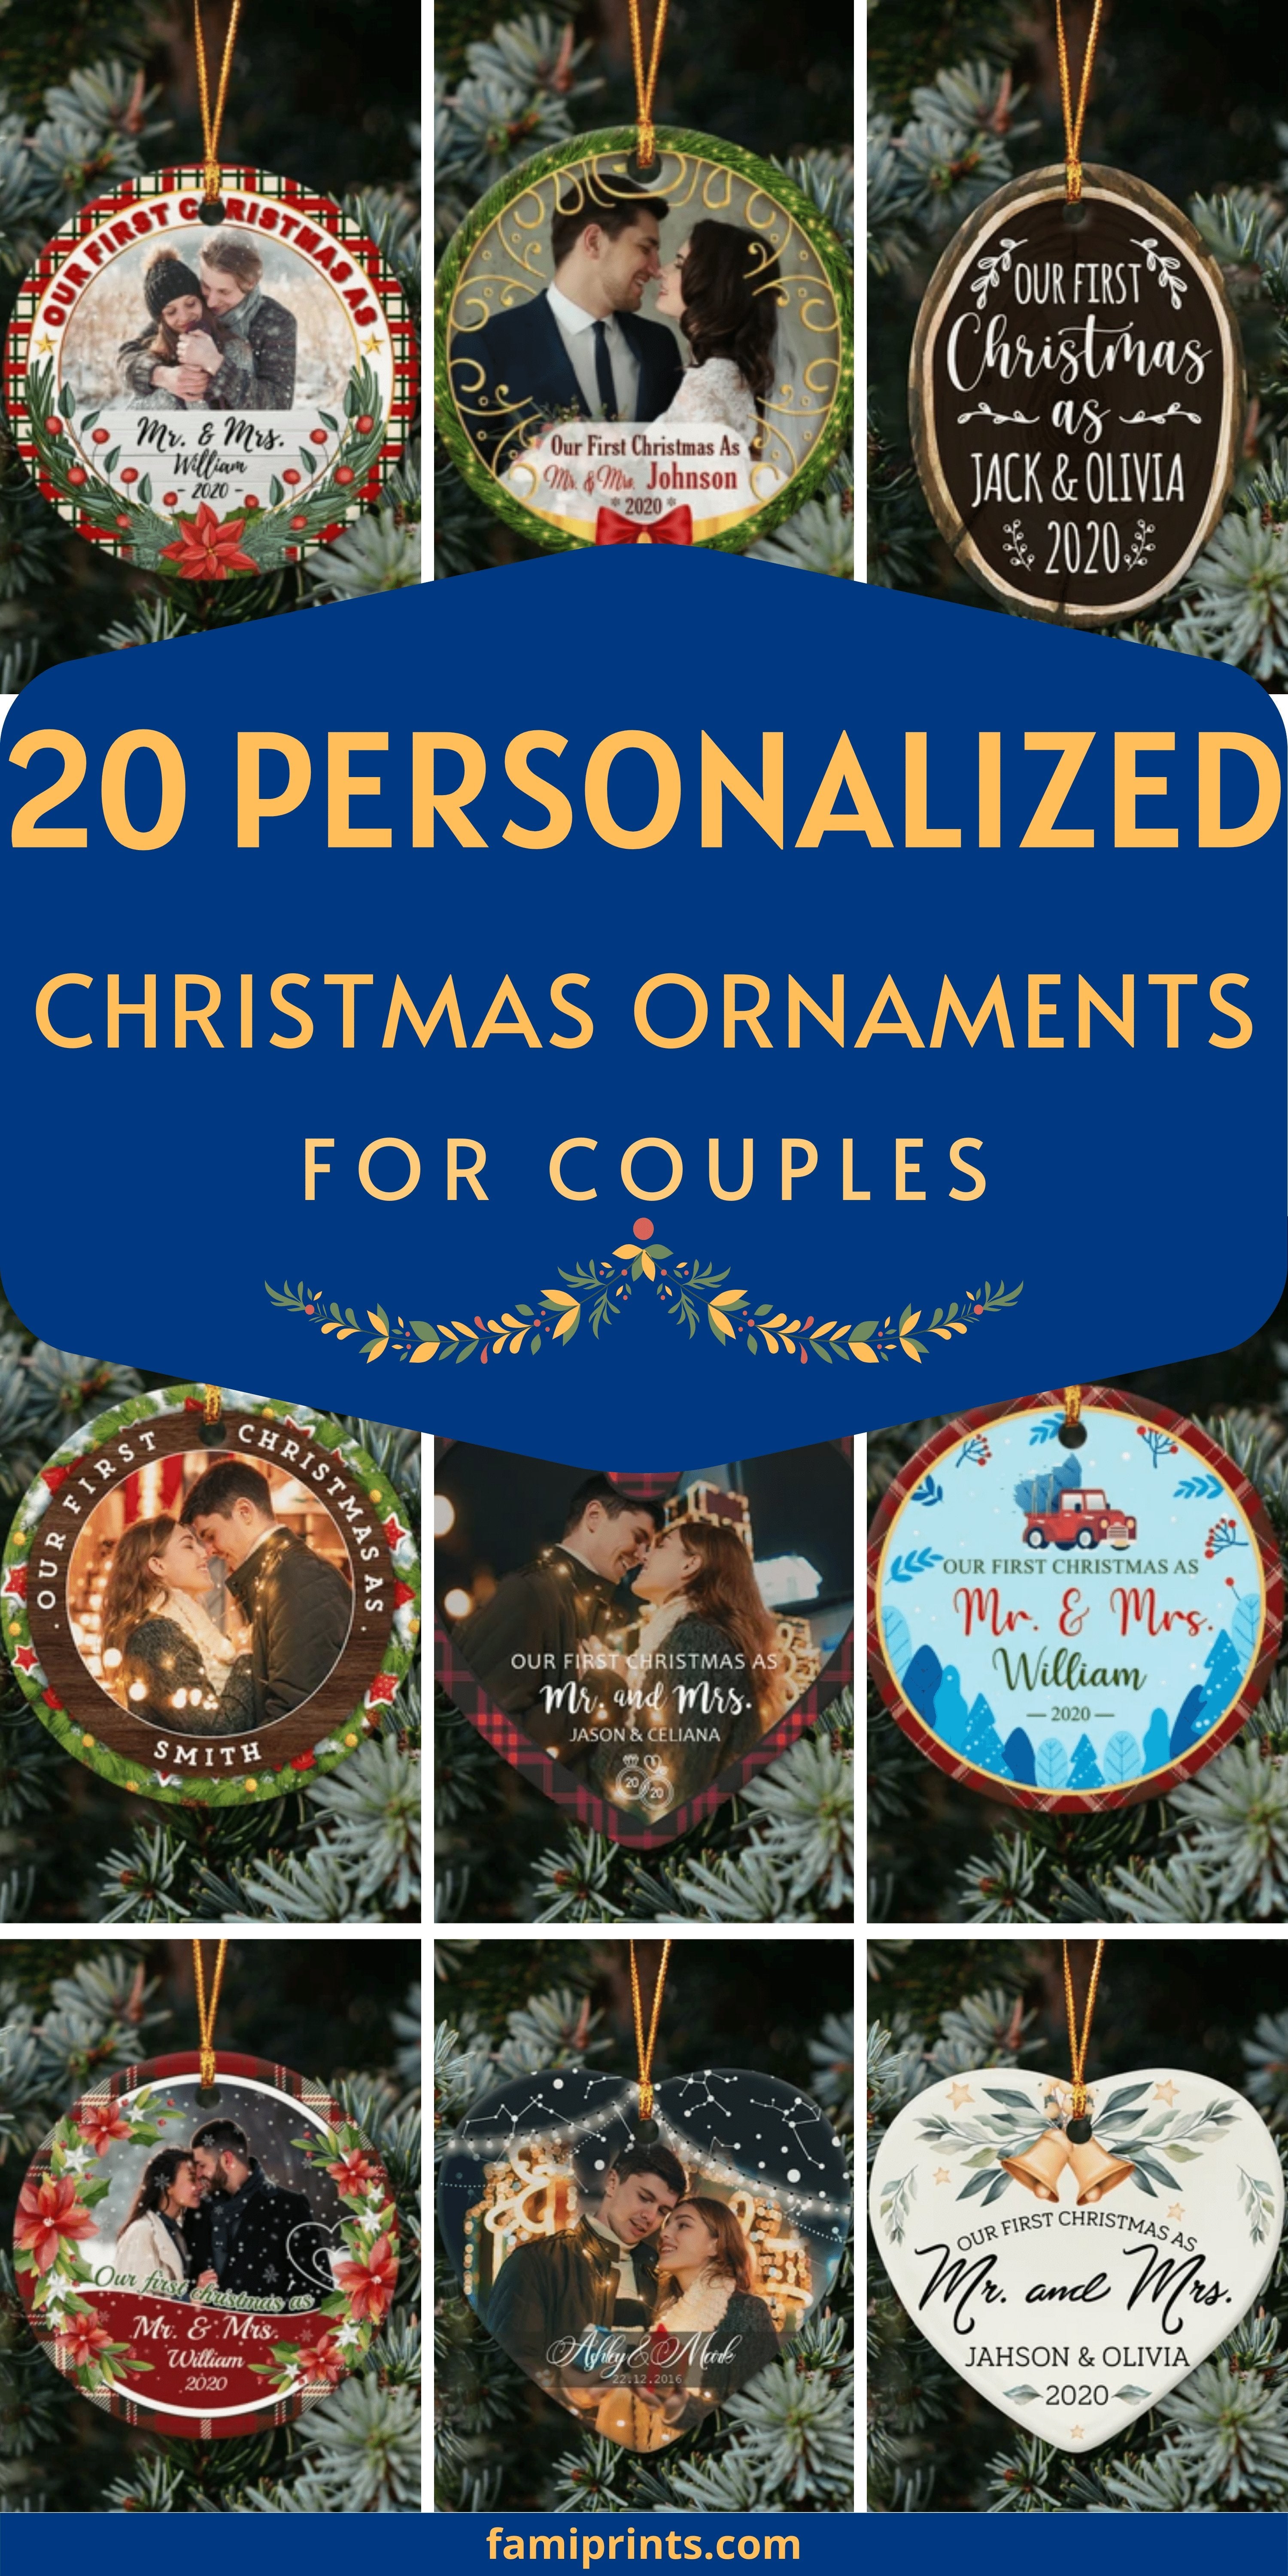 Personalized Christmas Ornaments For Couples & Newlyweds | FamiPrints | Trending Personalized Family Gifts